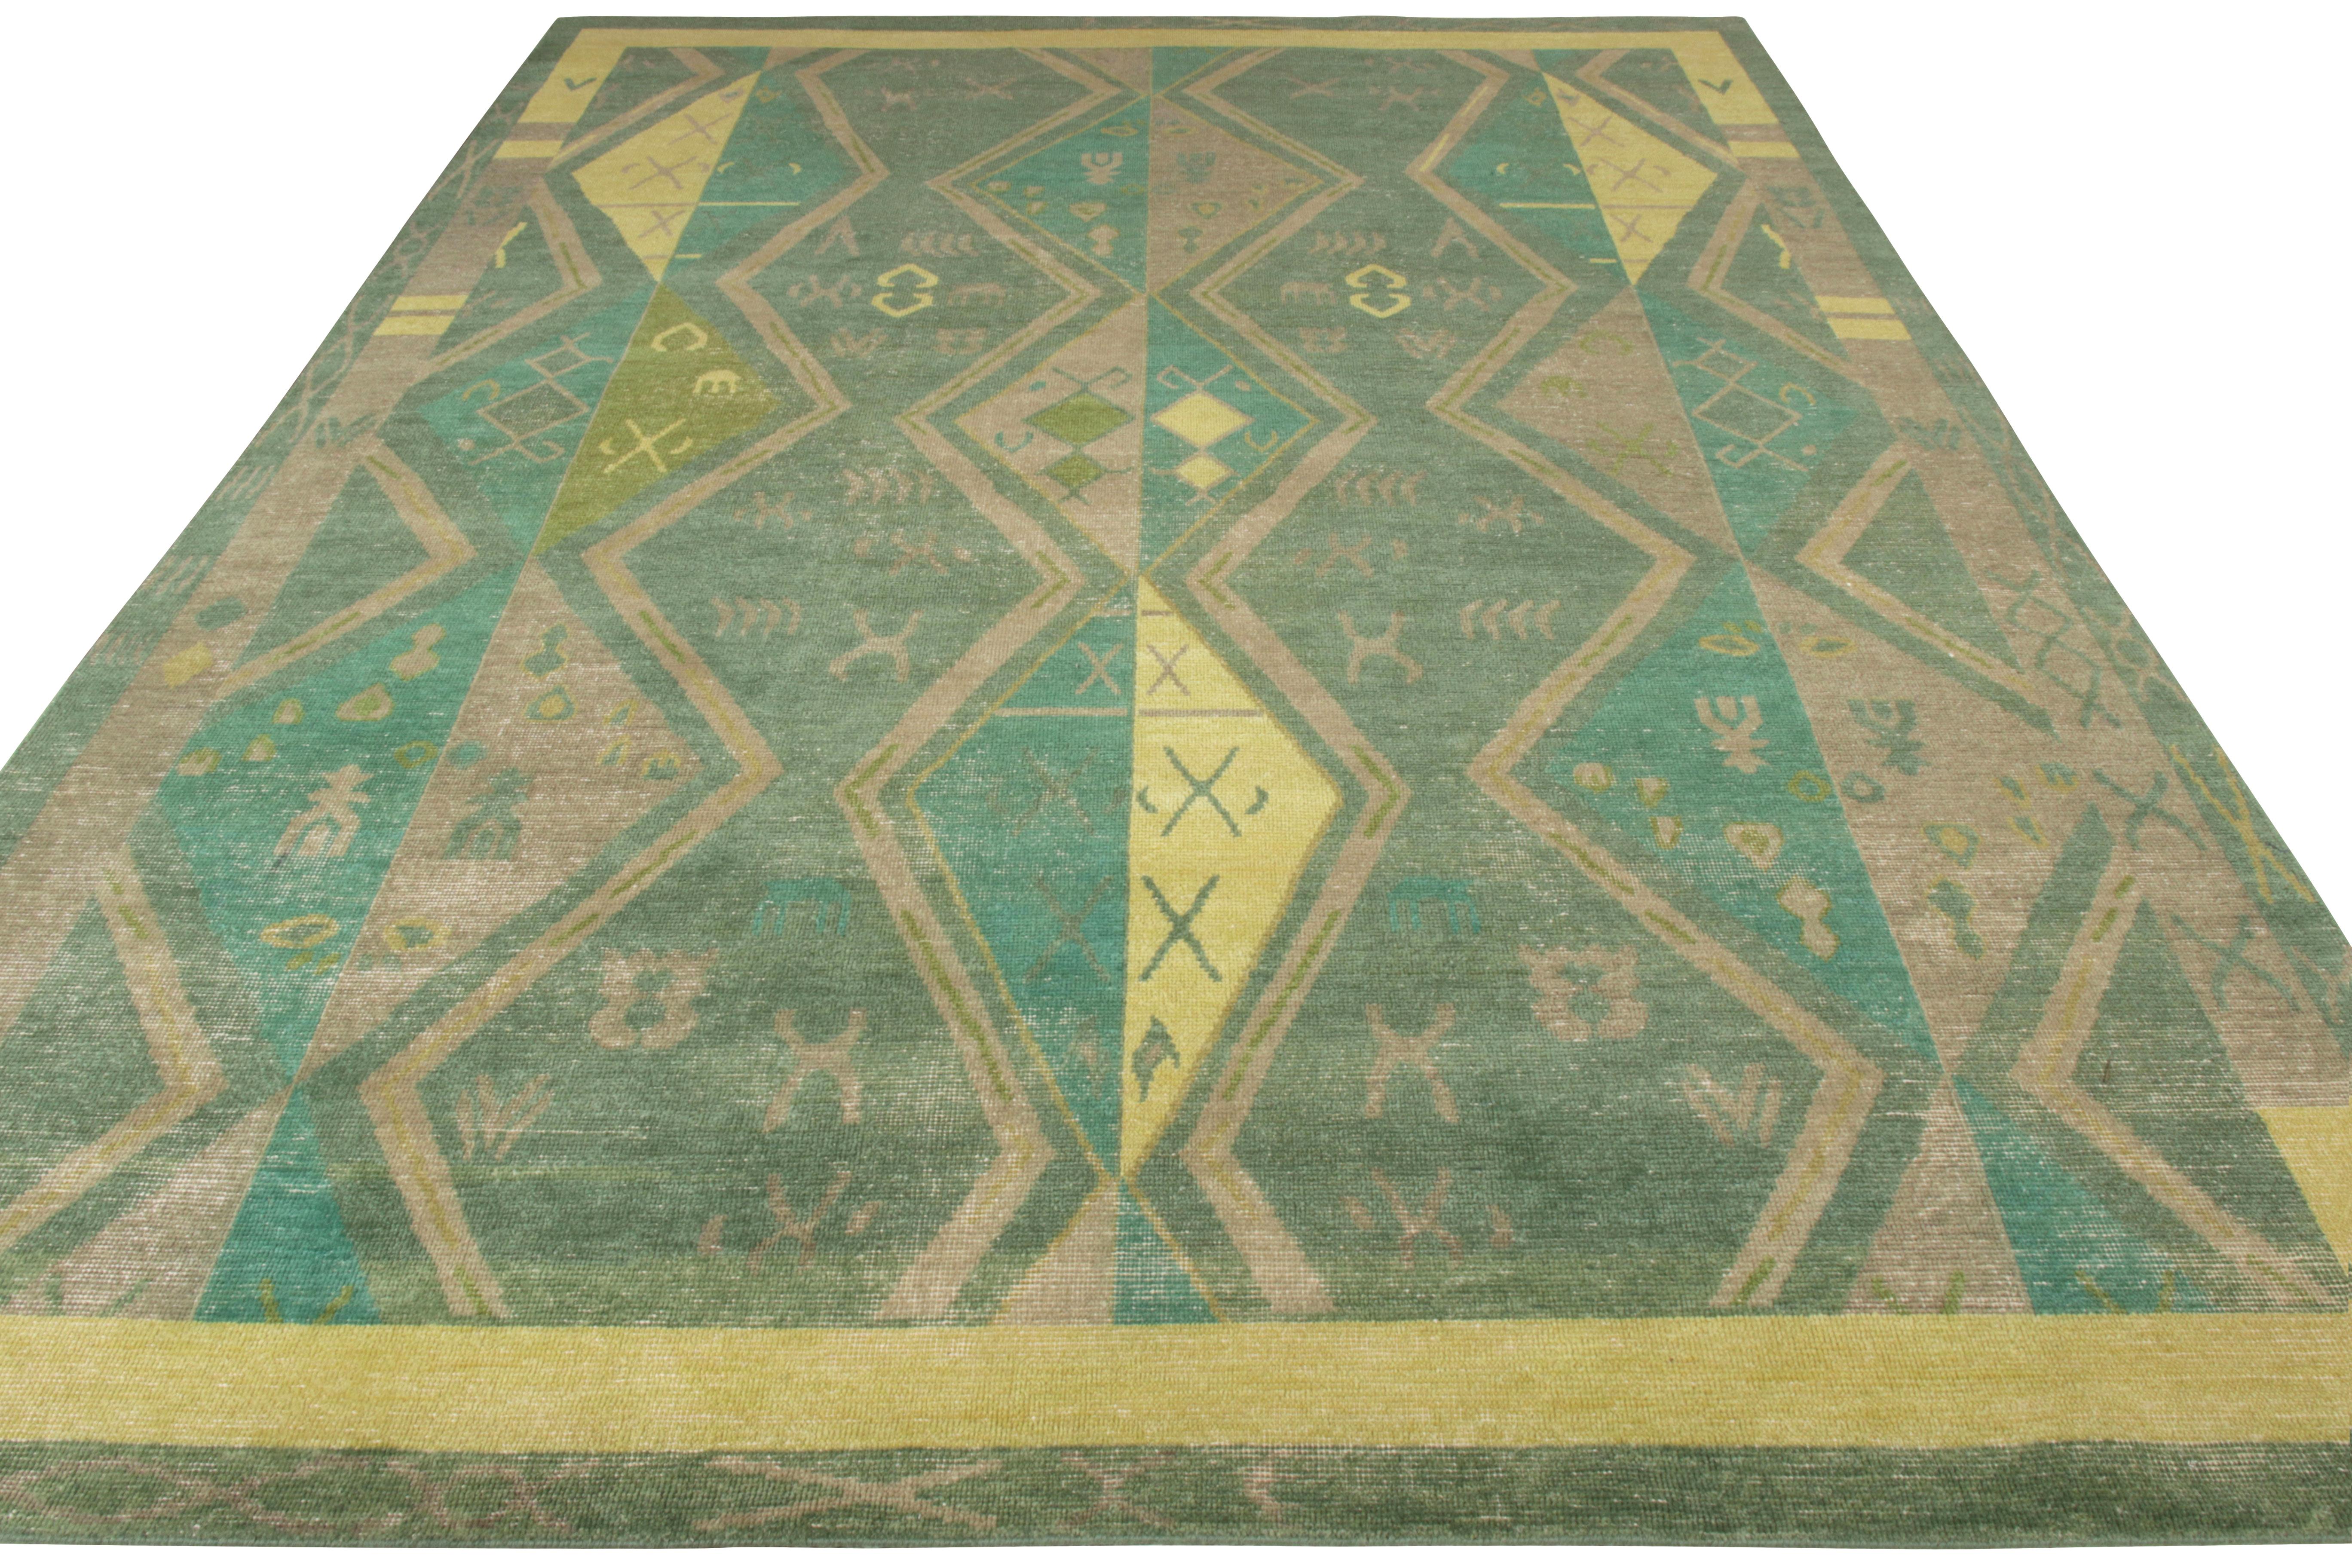 Rug & Kilim welcomes this 9 x 12 distressed style rug to its Homage collection. Following a tribal geometric pattern, this hand knotted wool beauty enjoys a unique take on traditional aesthetics marrying a shabby chic demeanour. The delicious